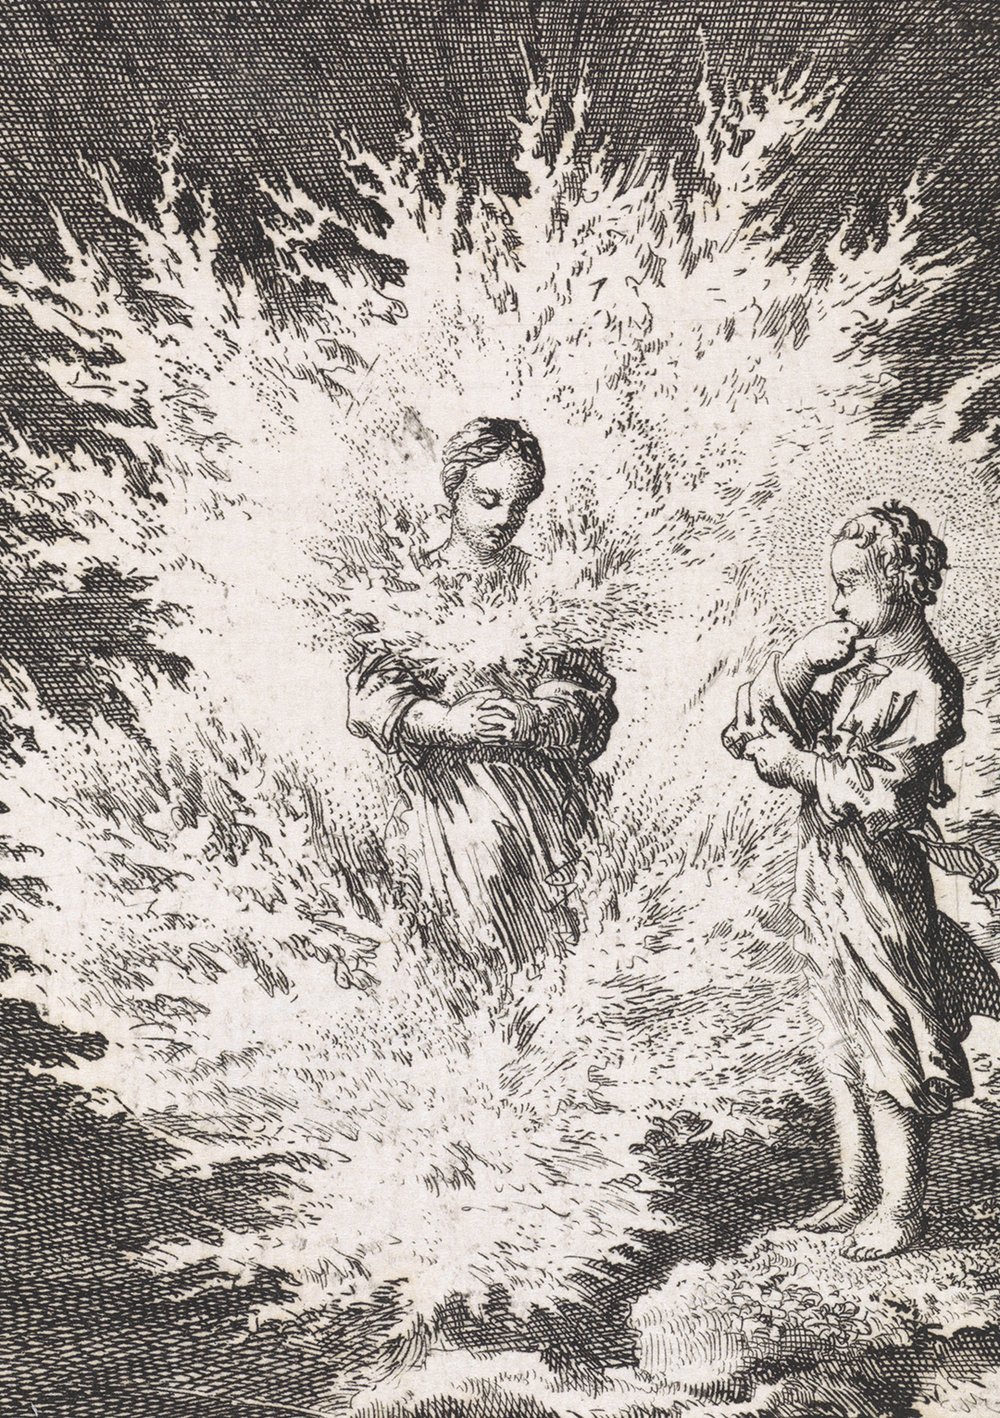 "Christ beholds the personified soul surrounded by flames" (1714)